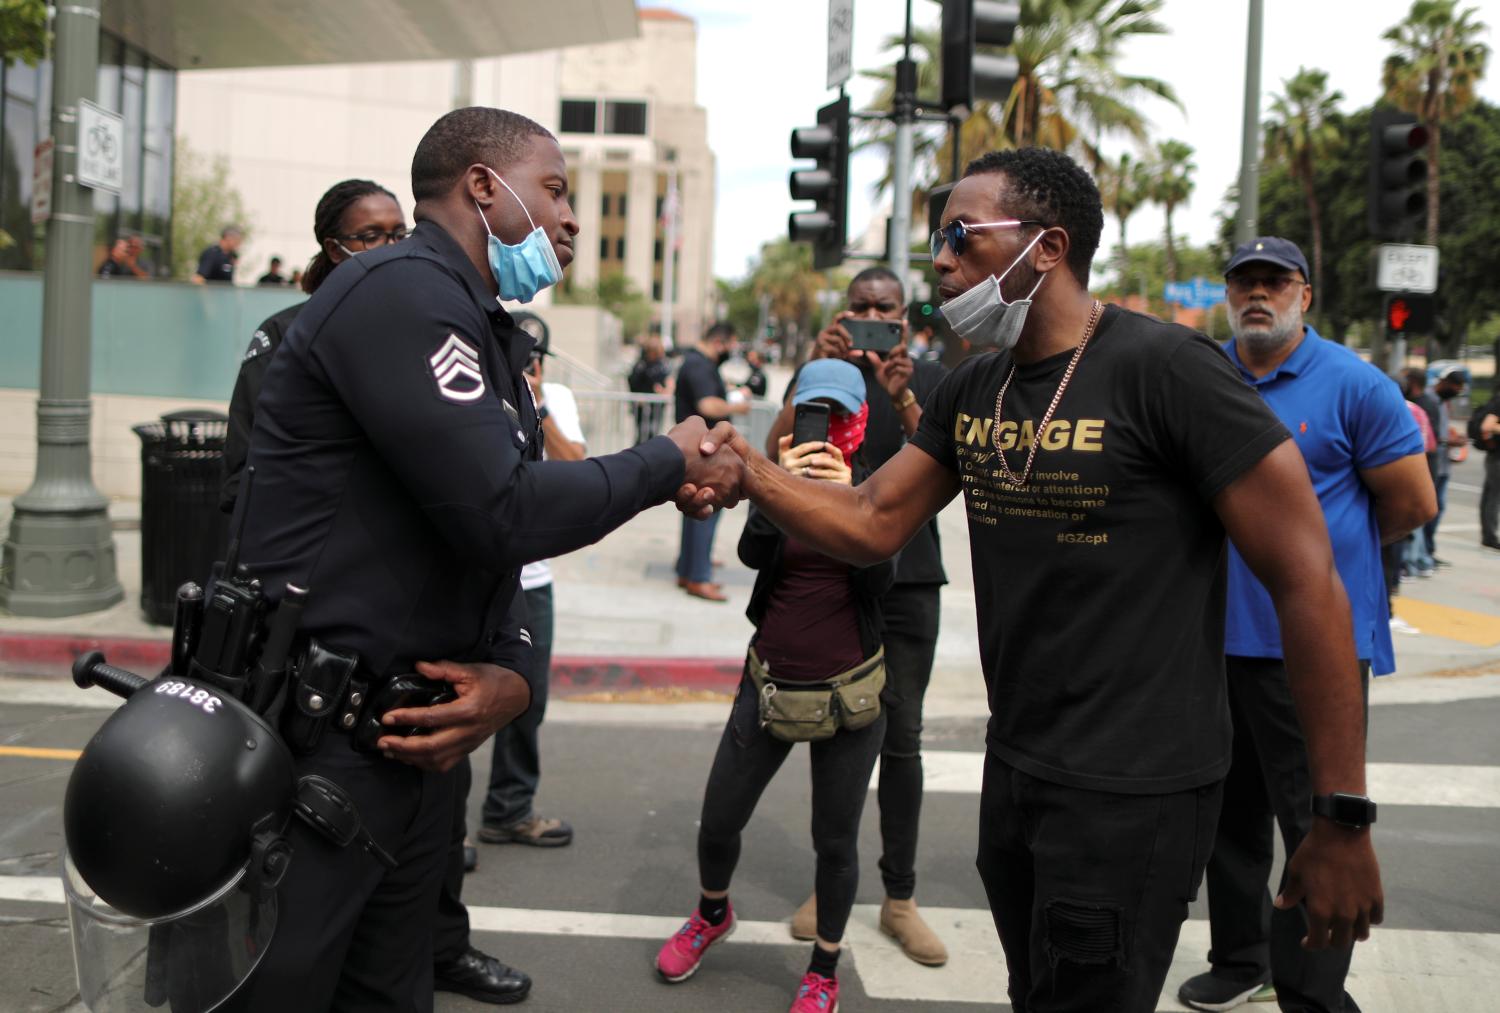 A police officer shakes hands with a demonstrator during a protest against the death in Minneapolis police custody of George Floyd, outside LAPD headquarters in Los Angeles, California, U.S. June 2, 2020. REUTERS/Lucy Nicholson